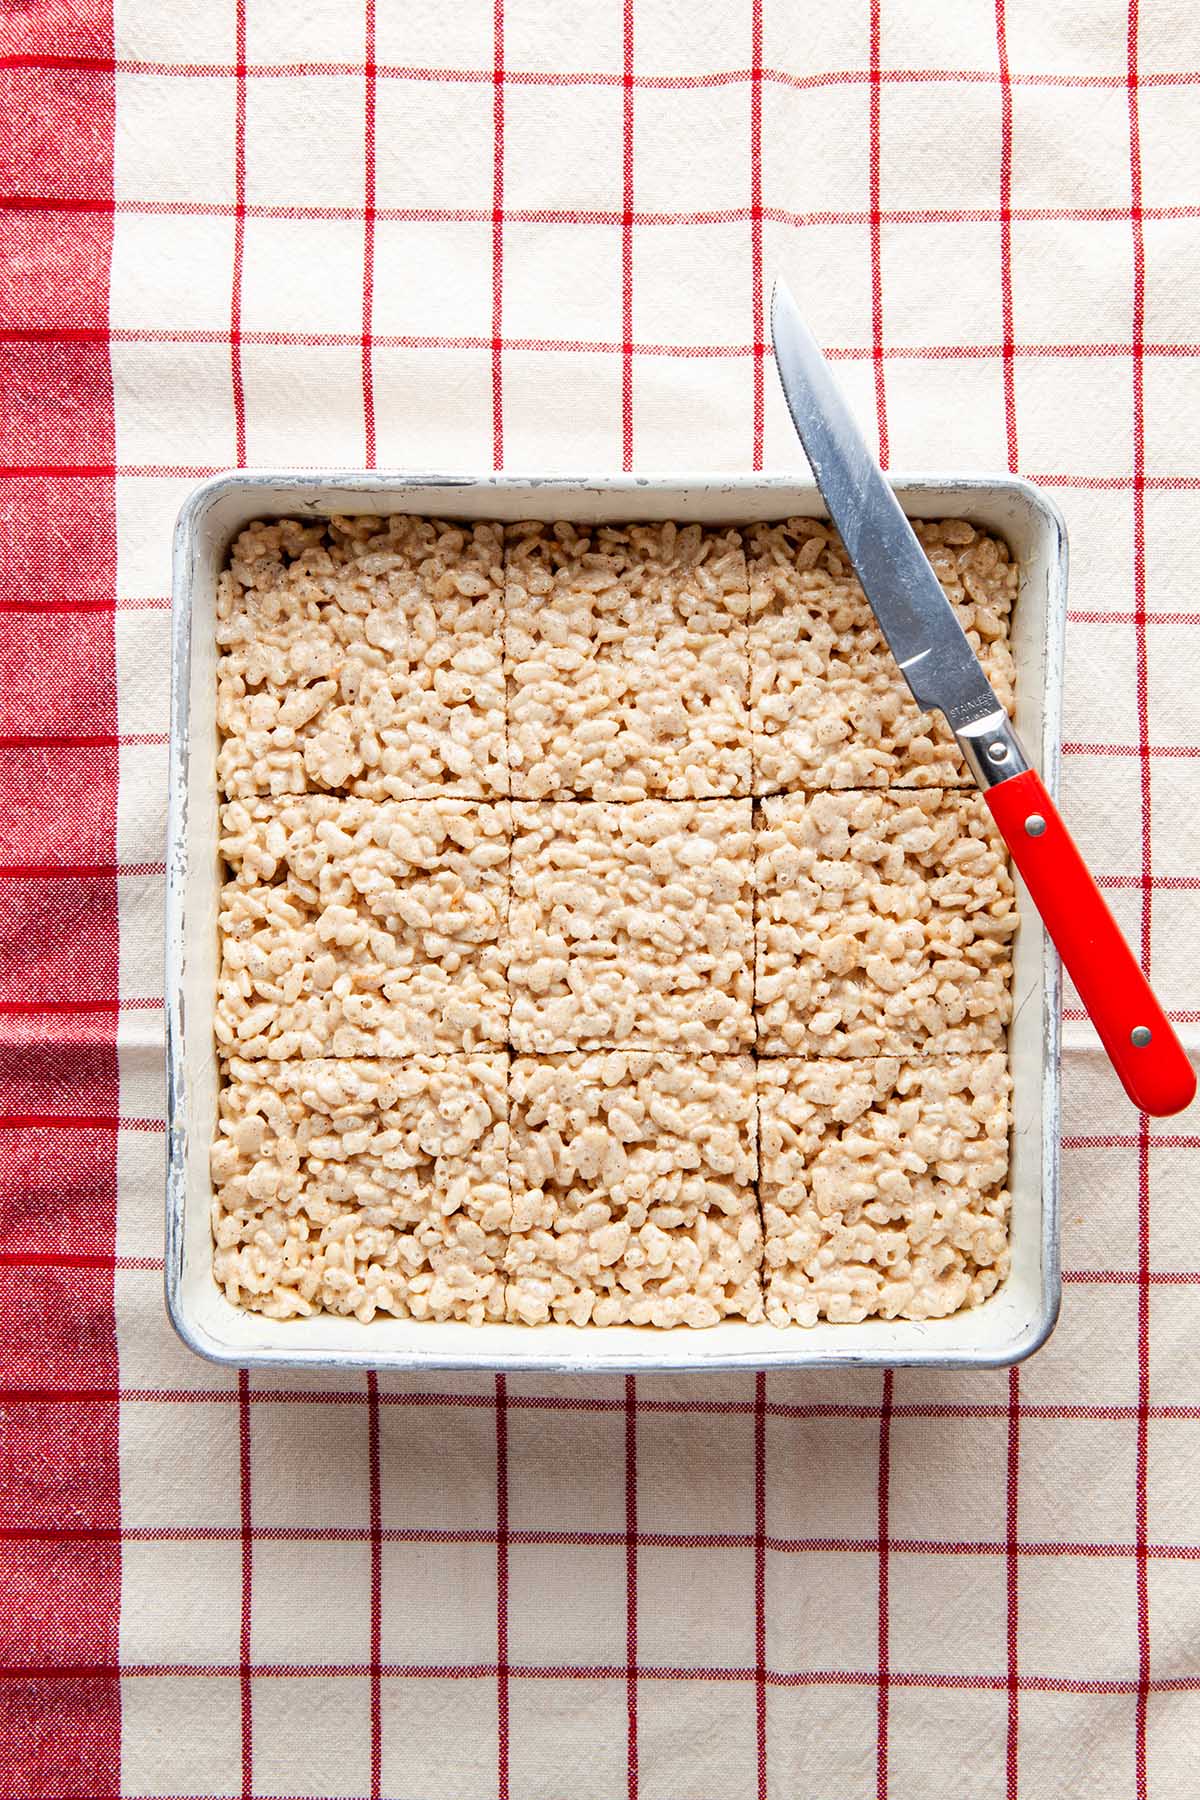 A pan of cut Rice Krispie squares with a red-orange-handled knife on a res checked tea towel.